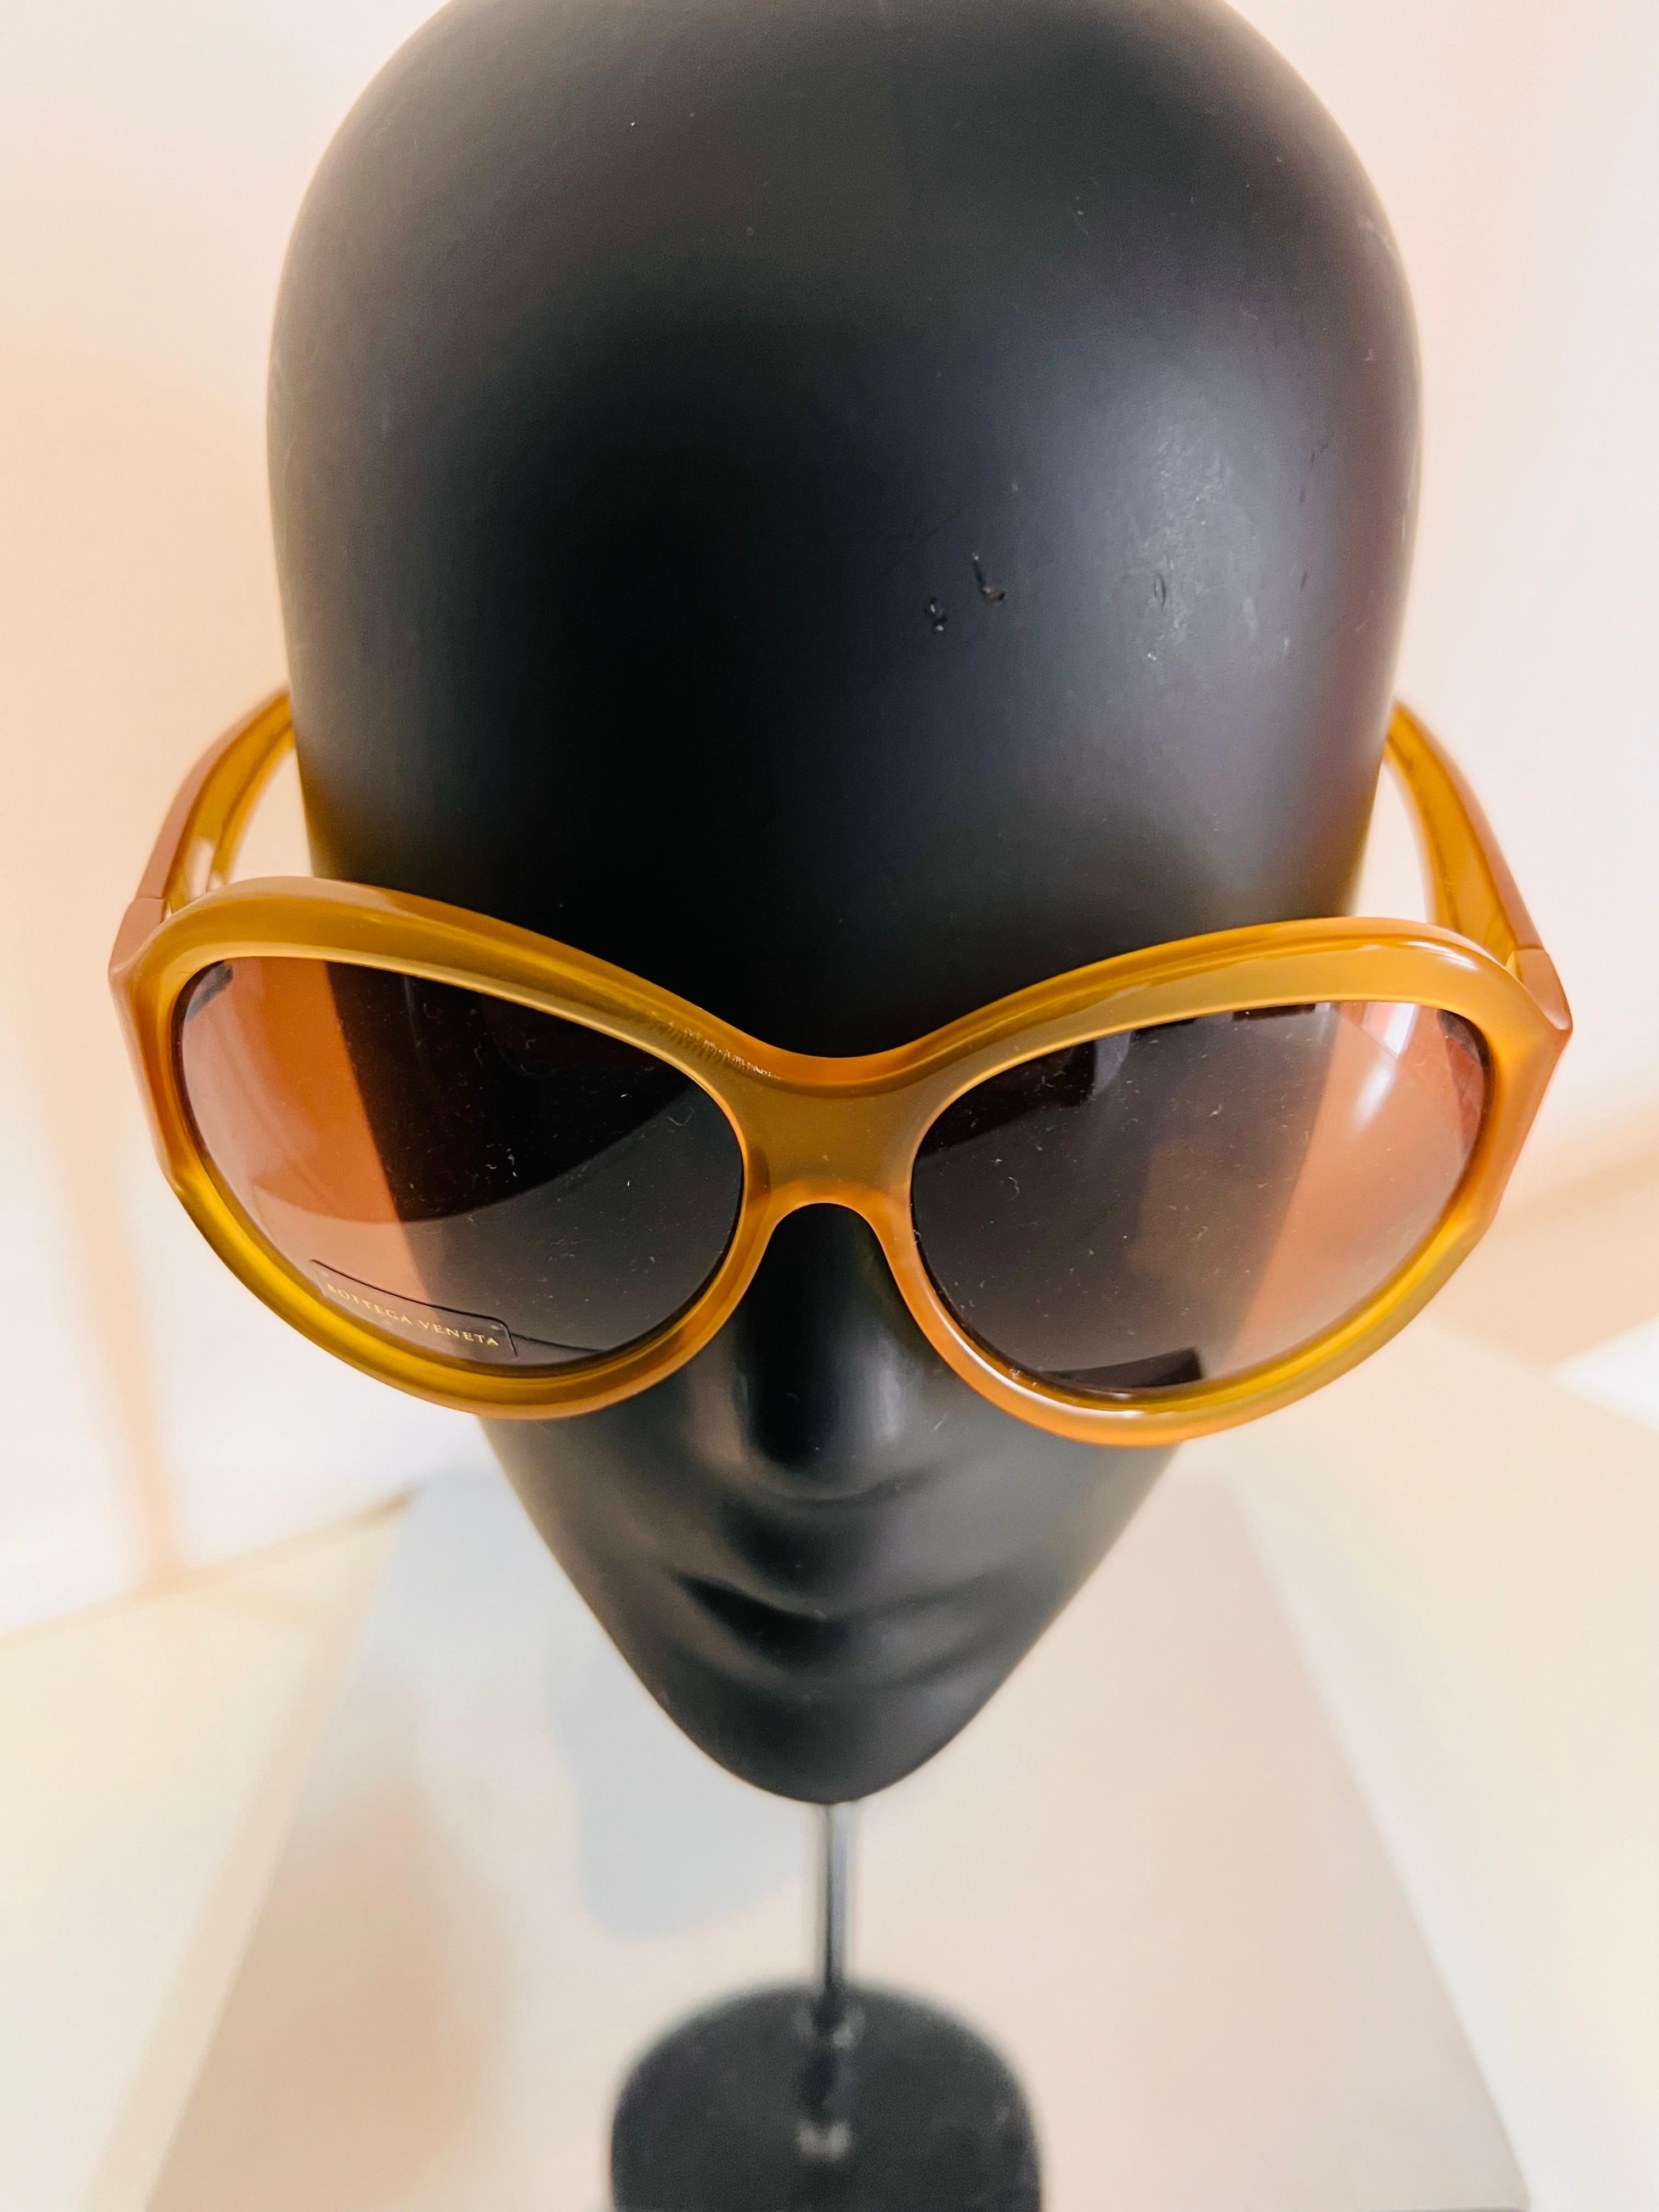 These beautifully honey coloured vintage 1990’s Bottega Veneta tilted oval sunglasses were sourced from an eyewear dealer in Rome, Italy and are a great example of this period of fashion for this now highly collectible Italian design house.

With